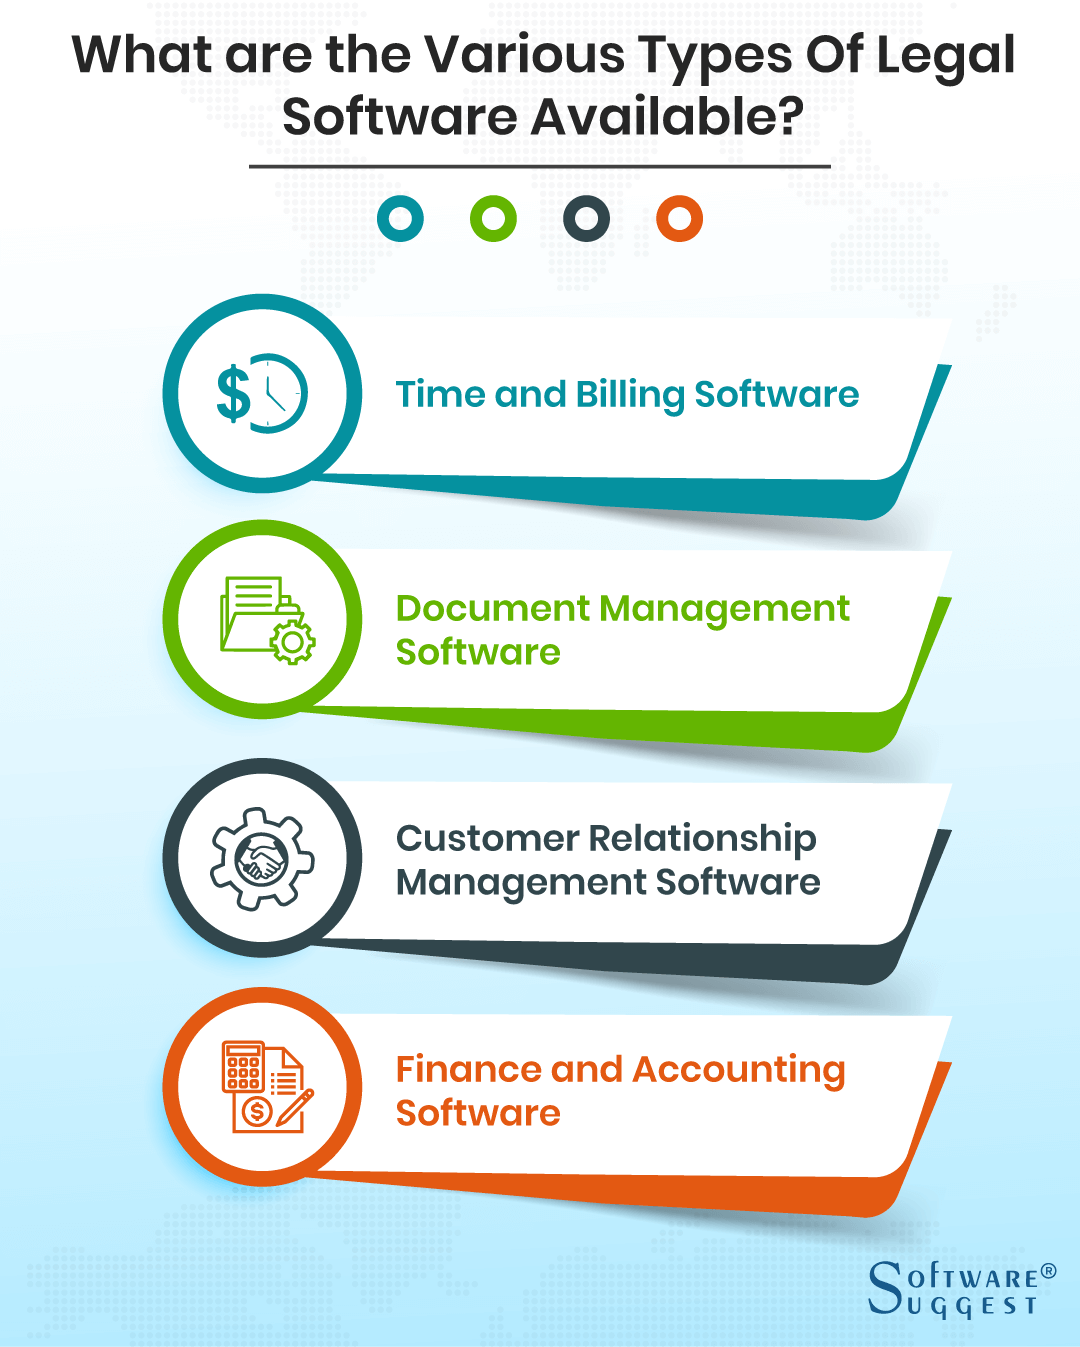 Infographic: Exploring the 4 types of legal software – time and billing software, document management software, customer relationship management software, and finance and accounting software. Click to read the article '20 Best Law Firms and Advocates Software for Lawyers in 2023'.